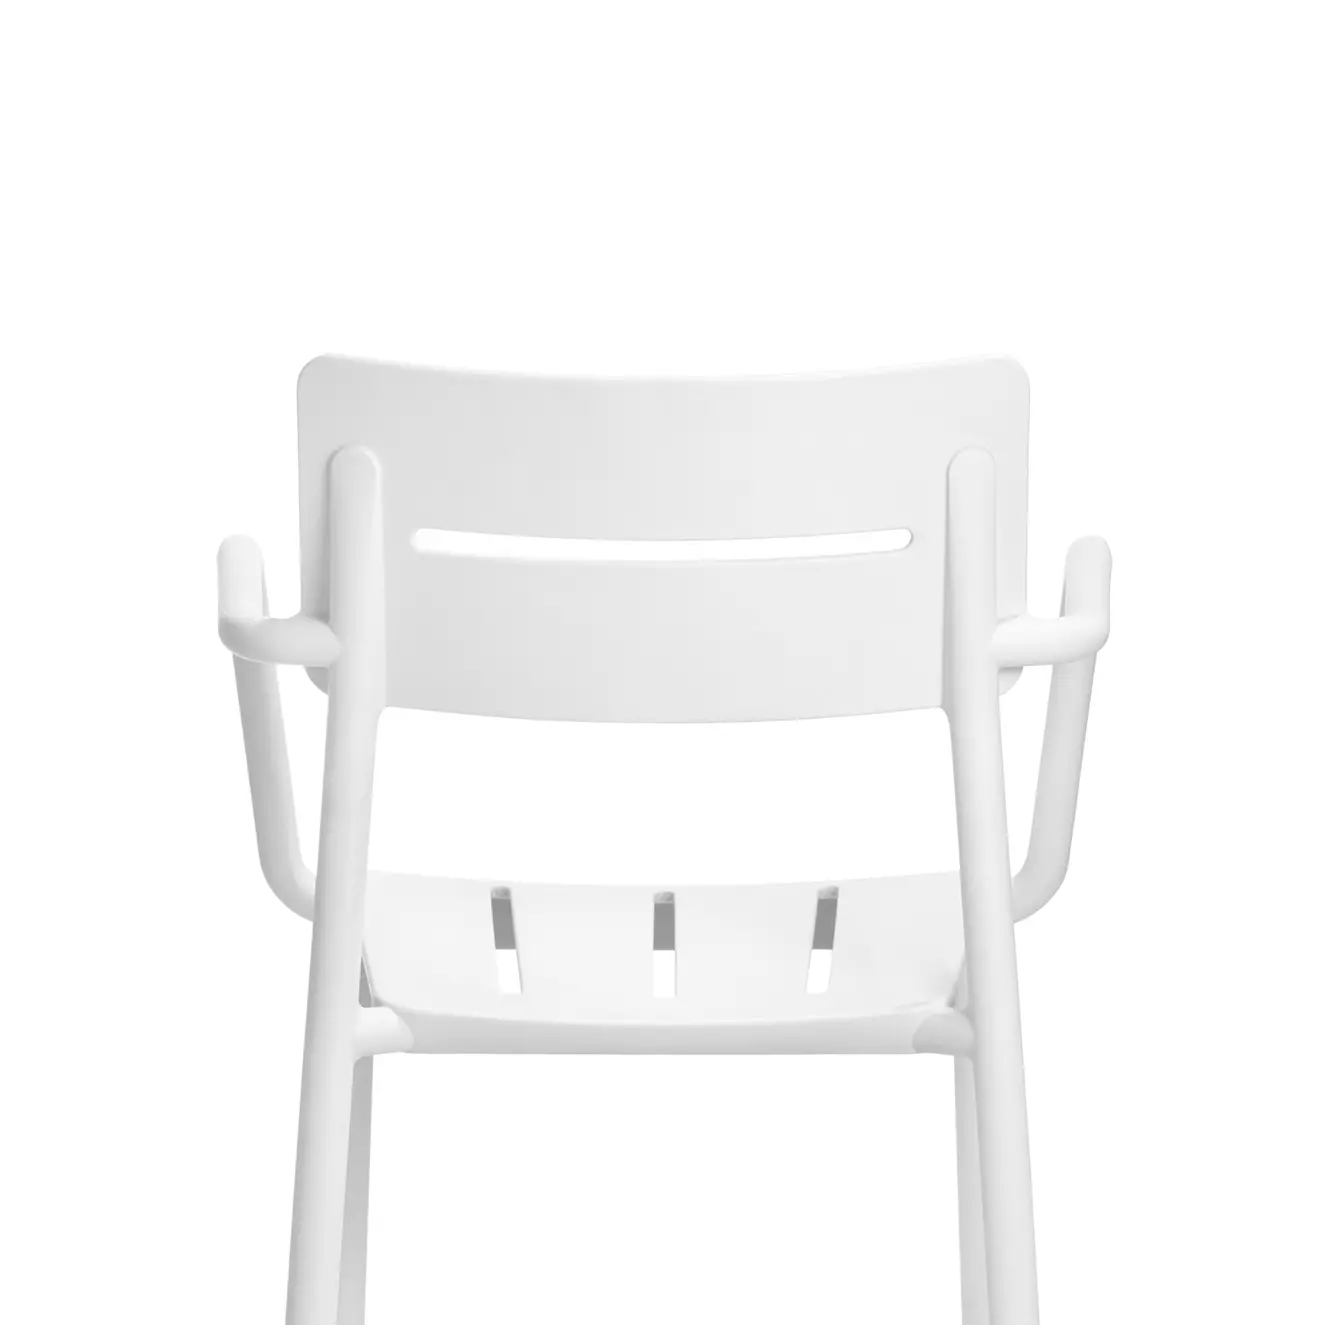 Outo chair by TOOU